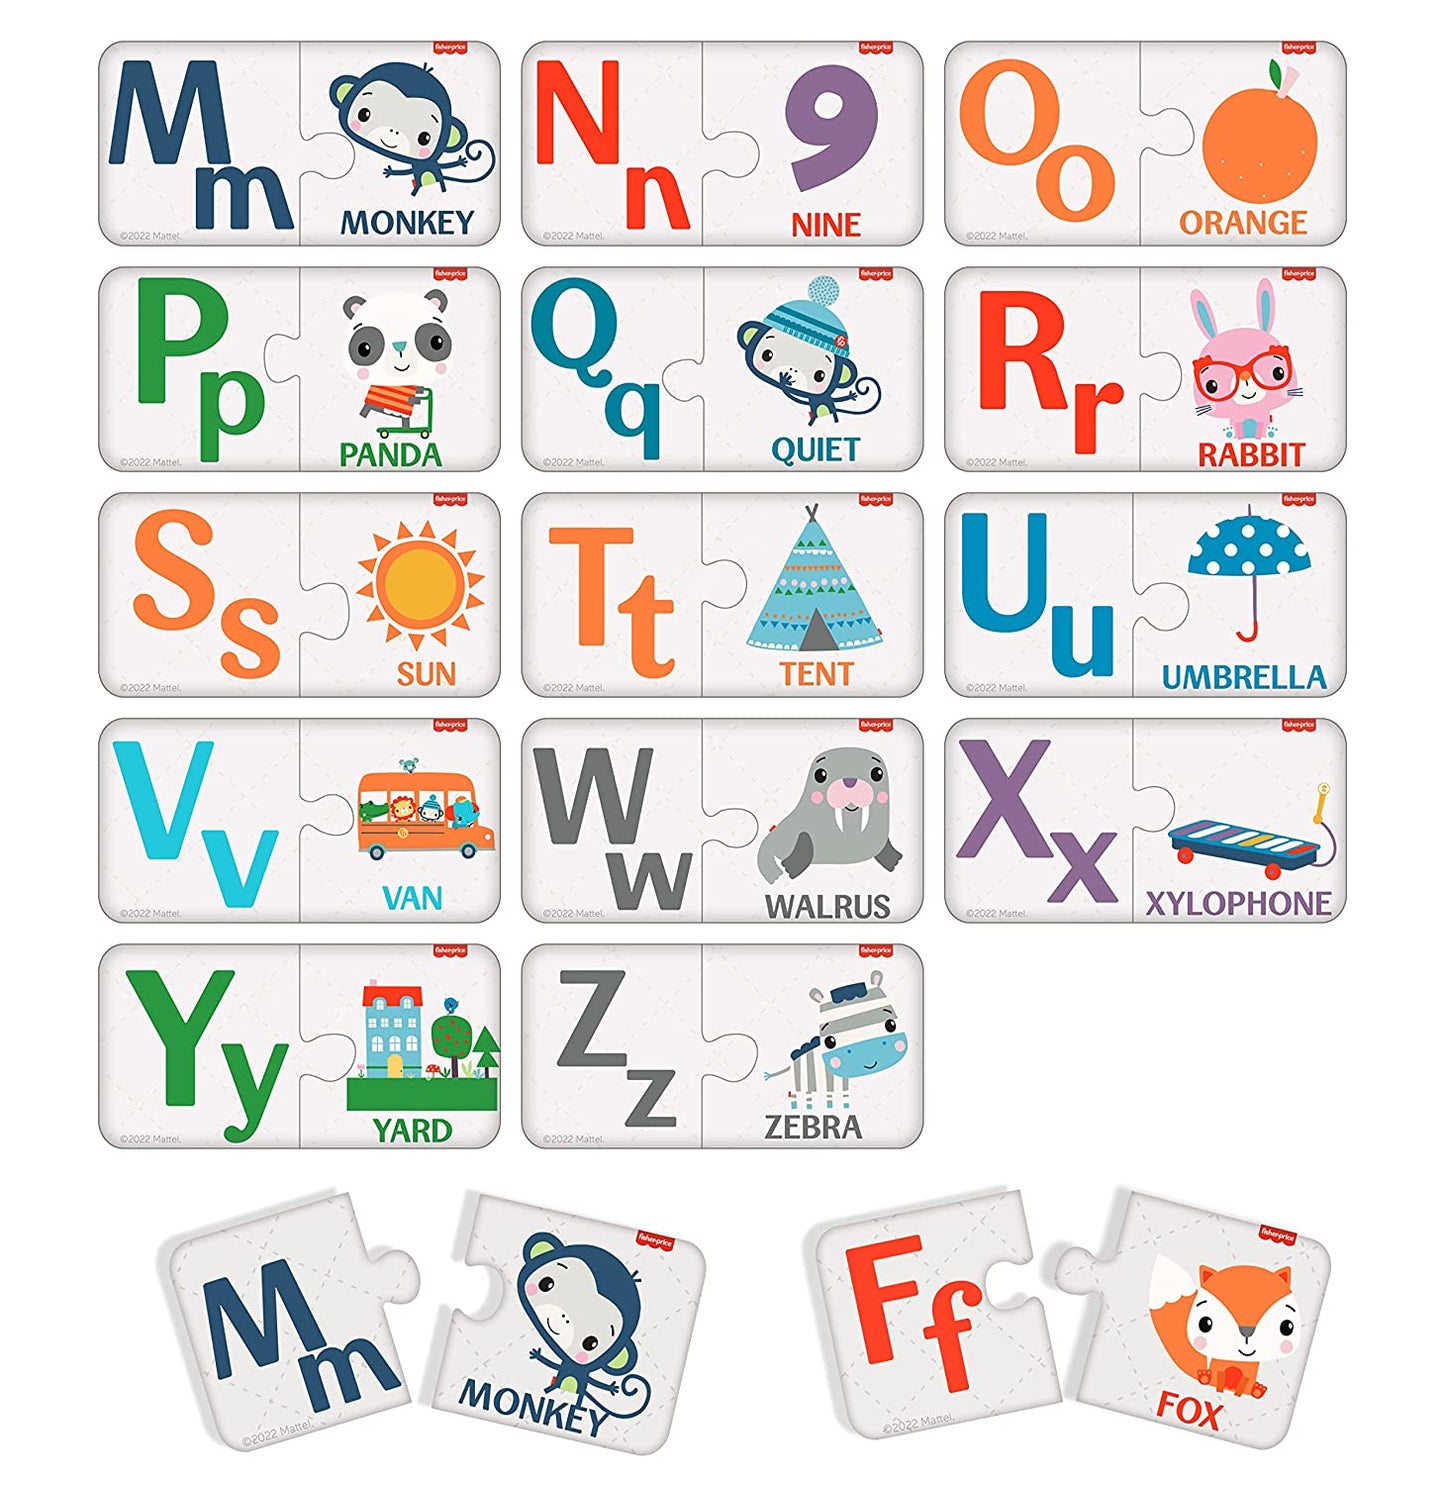 Fun with Alphabets Puzzles | 52 Pieces Alphabet Matching Puzzles | Learning and Development Puzzles | Fun & Learn with Colorful Puzzles | Age :  3-5 Years + by Fisher Price